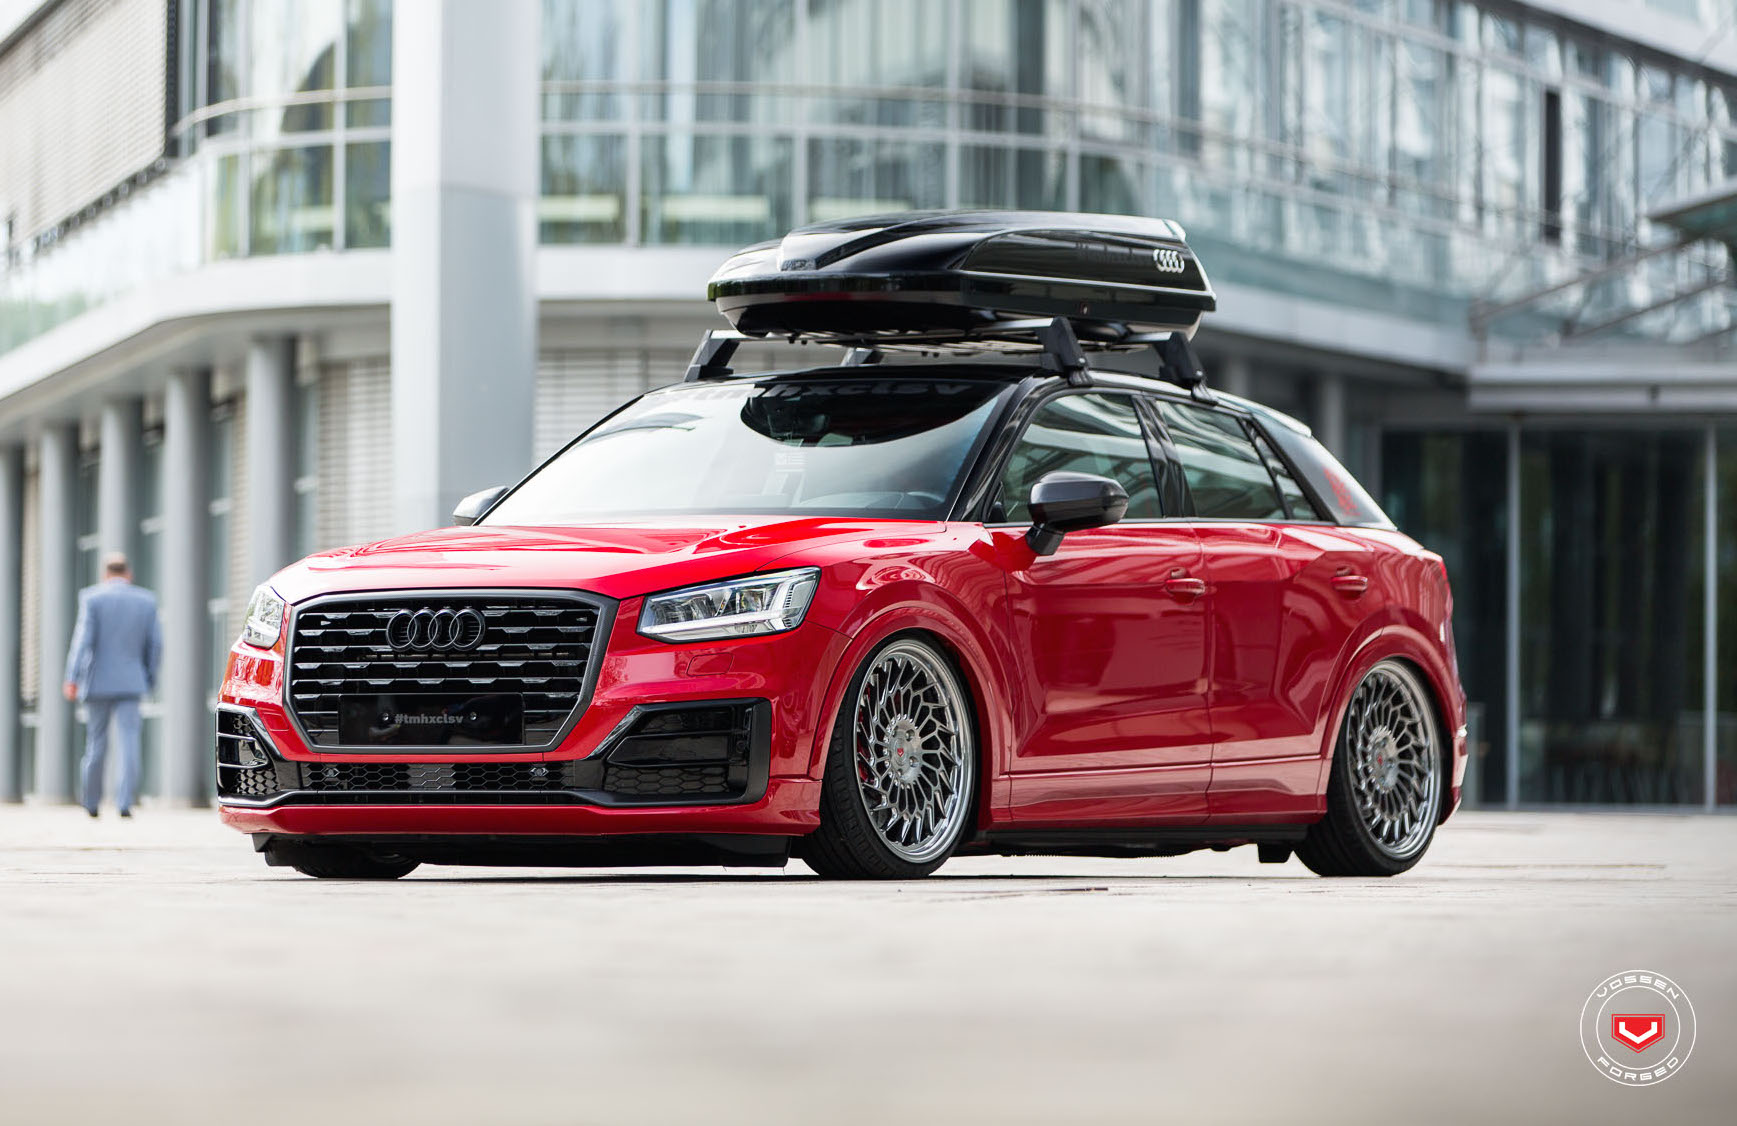 Audi Q2 slammed with Vossen wheels shows potential